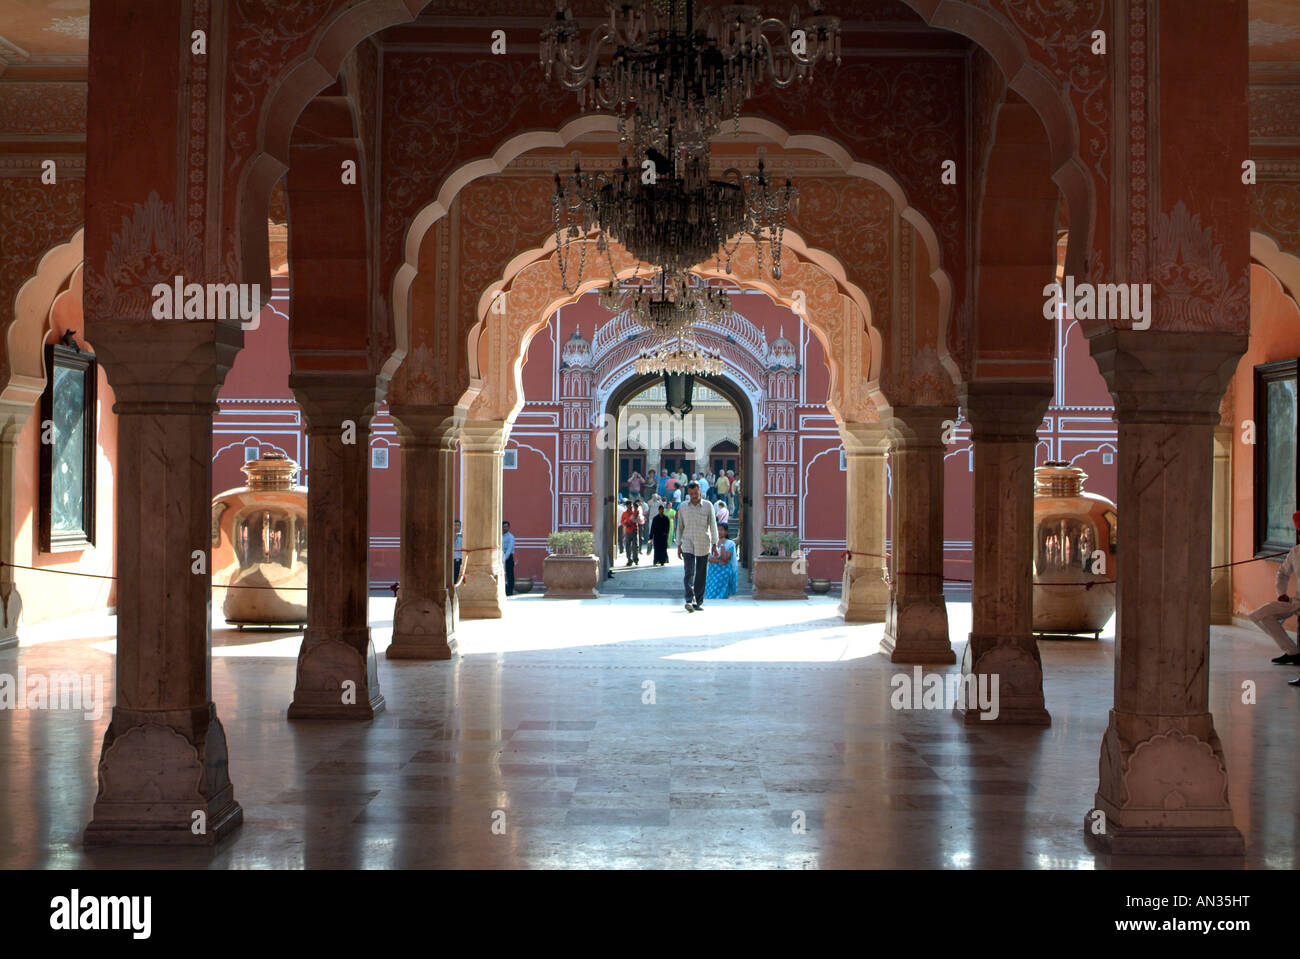 Interior detail of the ornate arches and decoration in the maharajahs city palace jaipur rajasthan India Stock Photo